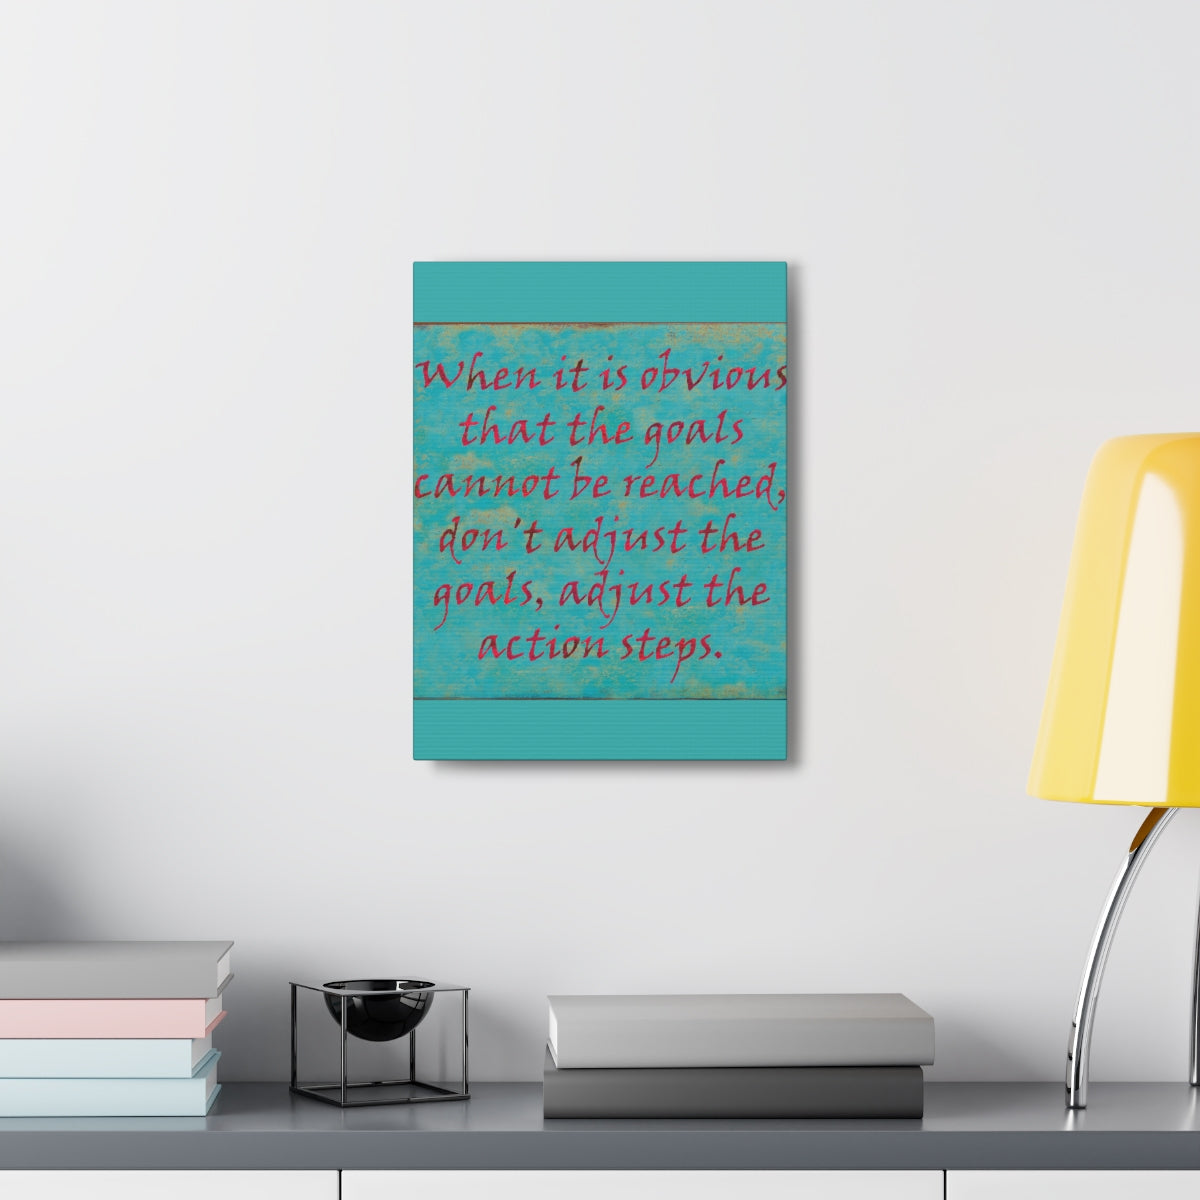 Scripture Walls Inspirational Wall Art Adjust Action Step Motivation Wall Decor for Home Office Gym Inspiring Success Quote Print Ready to Hang Unframed-Express Your Love Gifts